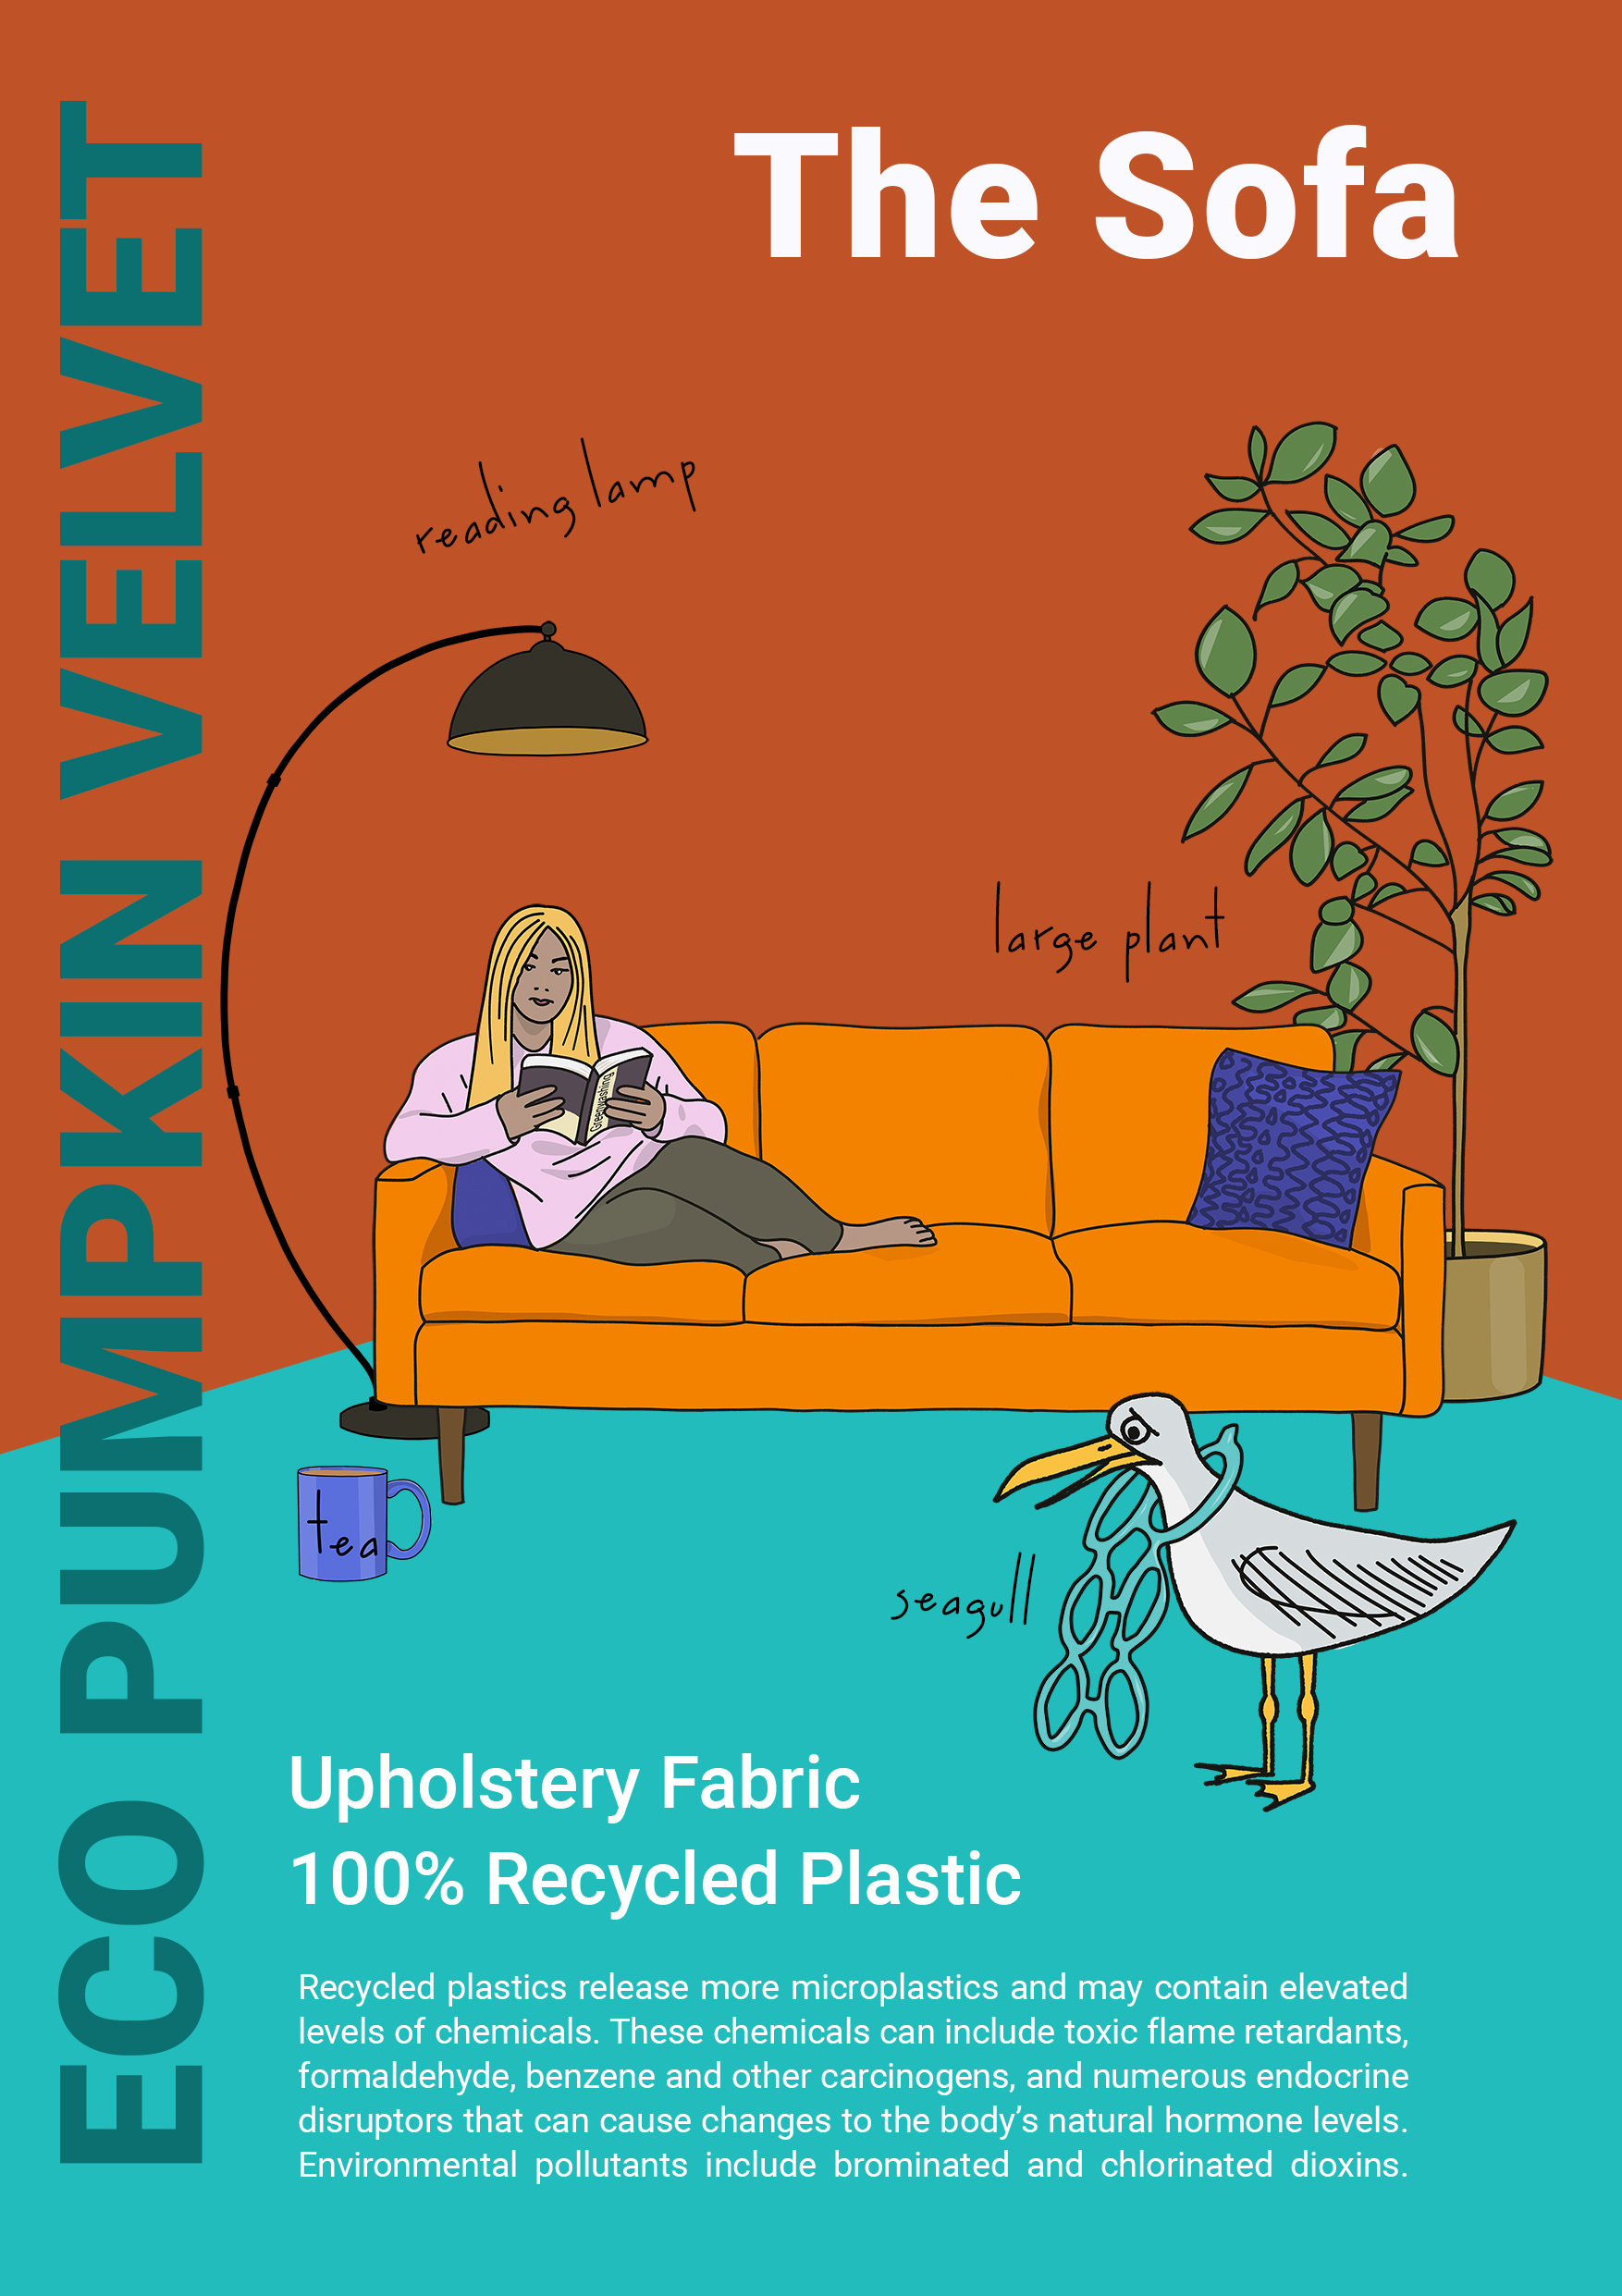 MA Communication Design work by Pip Samwell-Smith showing a scene with a sofa and a seagull.